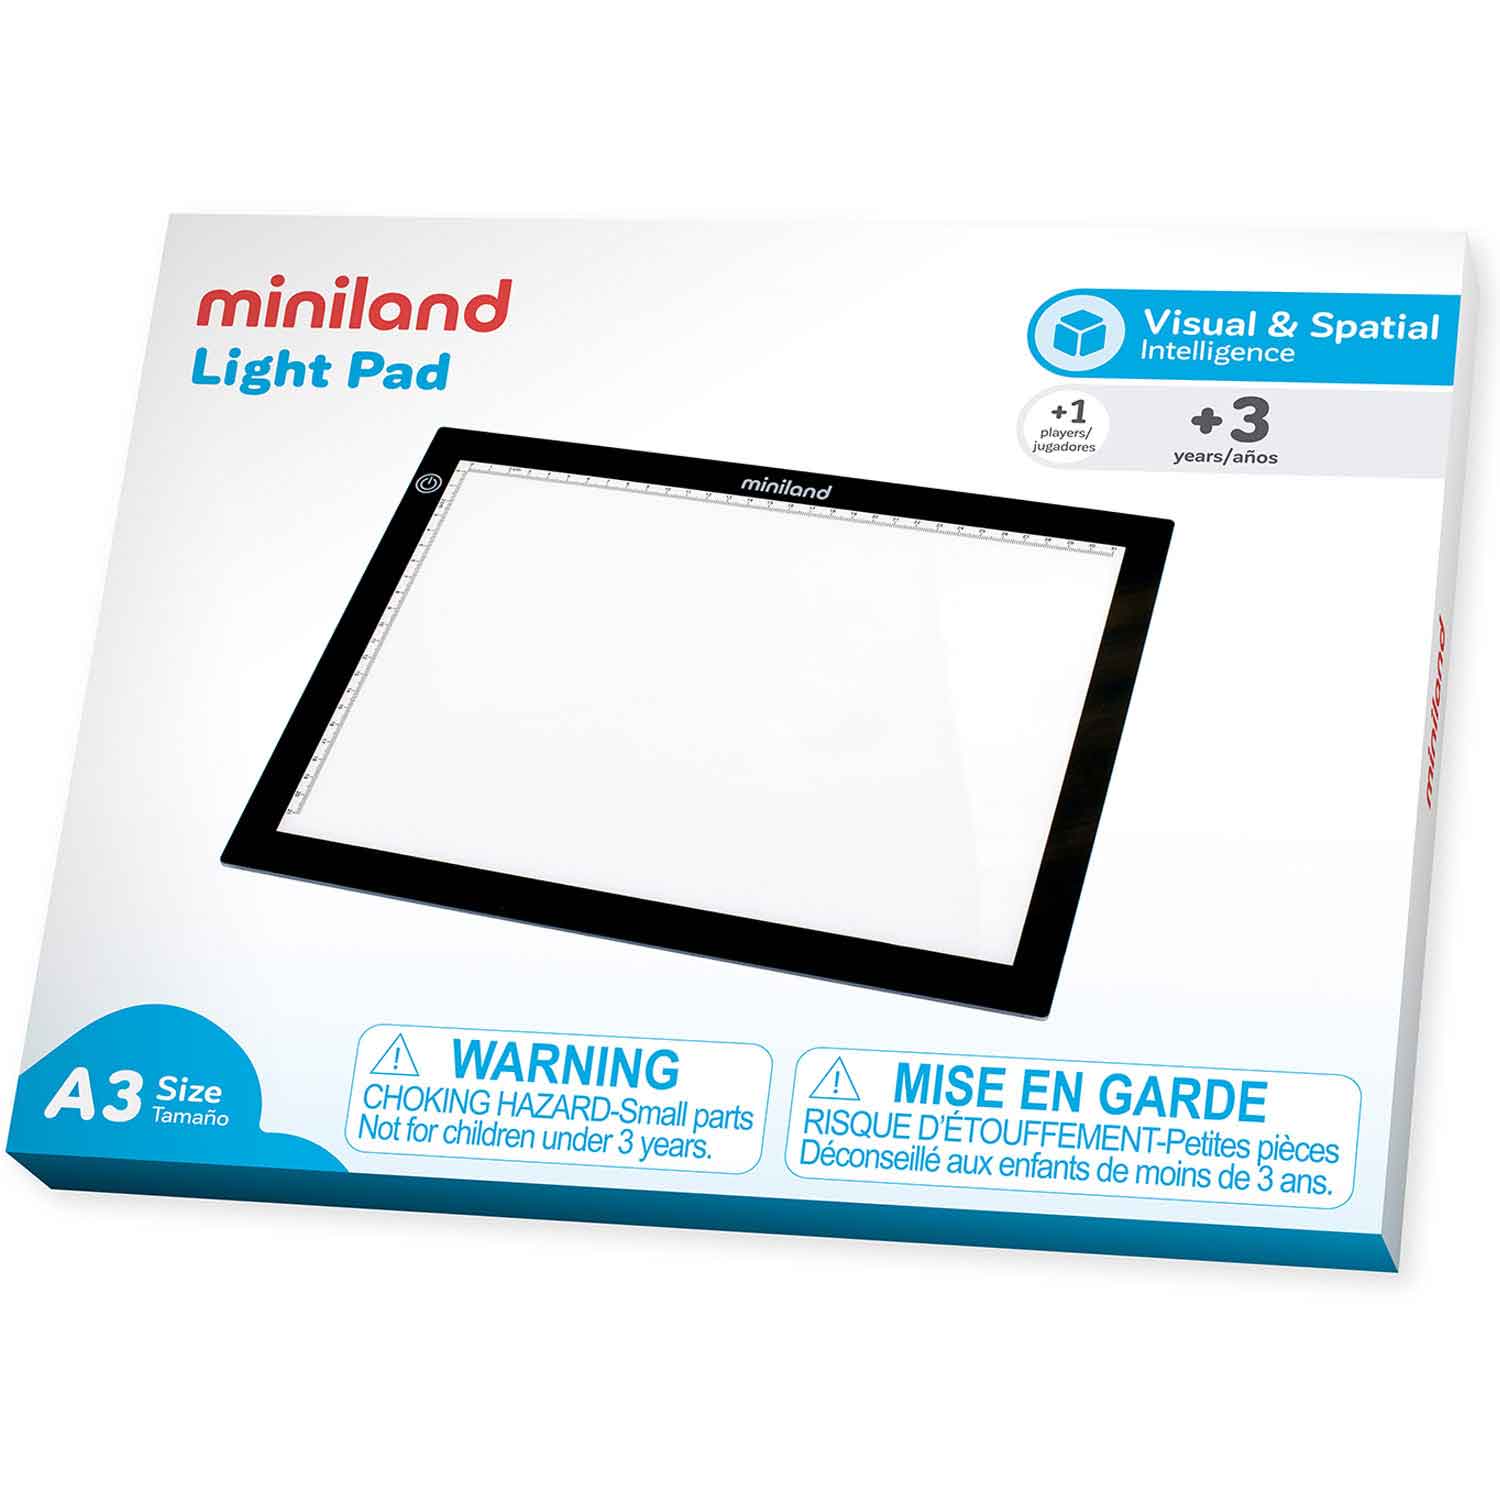 Portable Light Pad For Toddlers